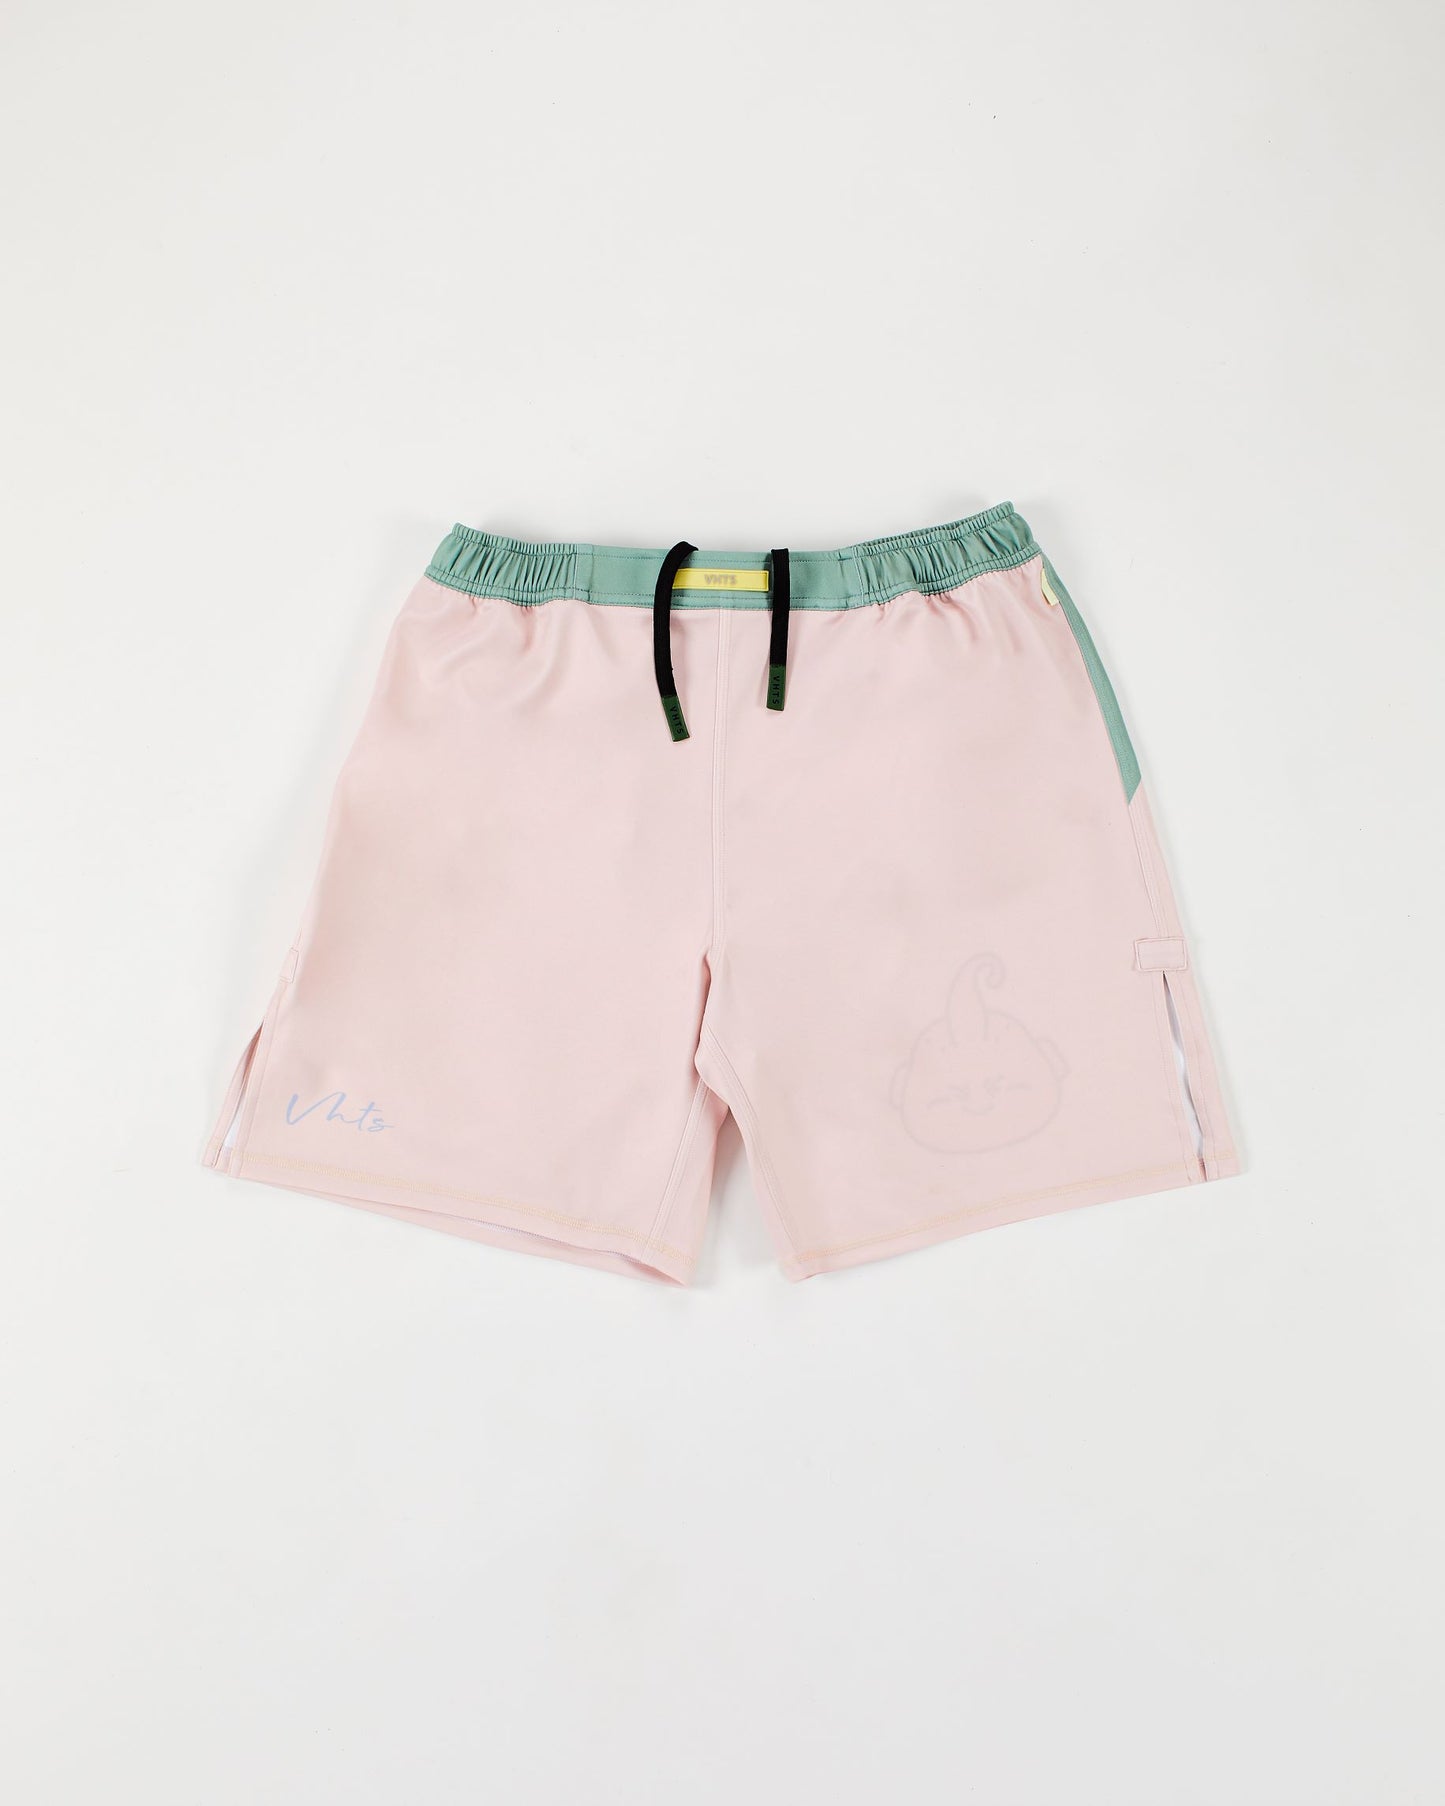 Spring/ Summer 2023 special edition "Buu23" Combat shorts